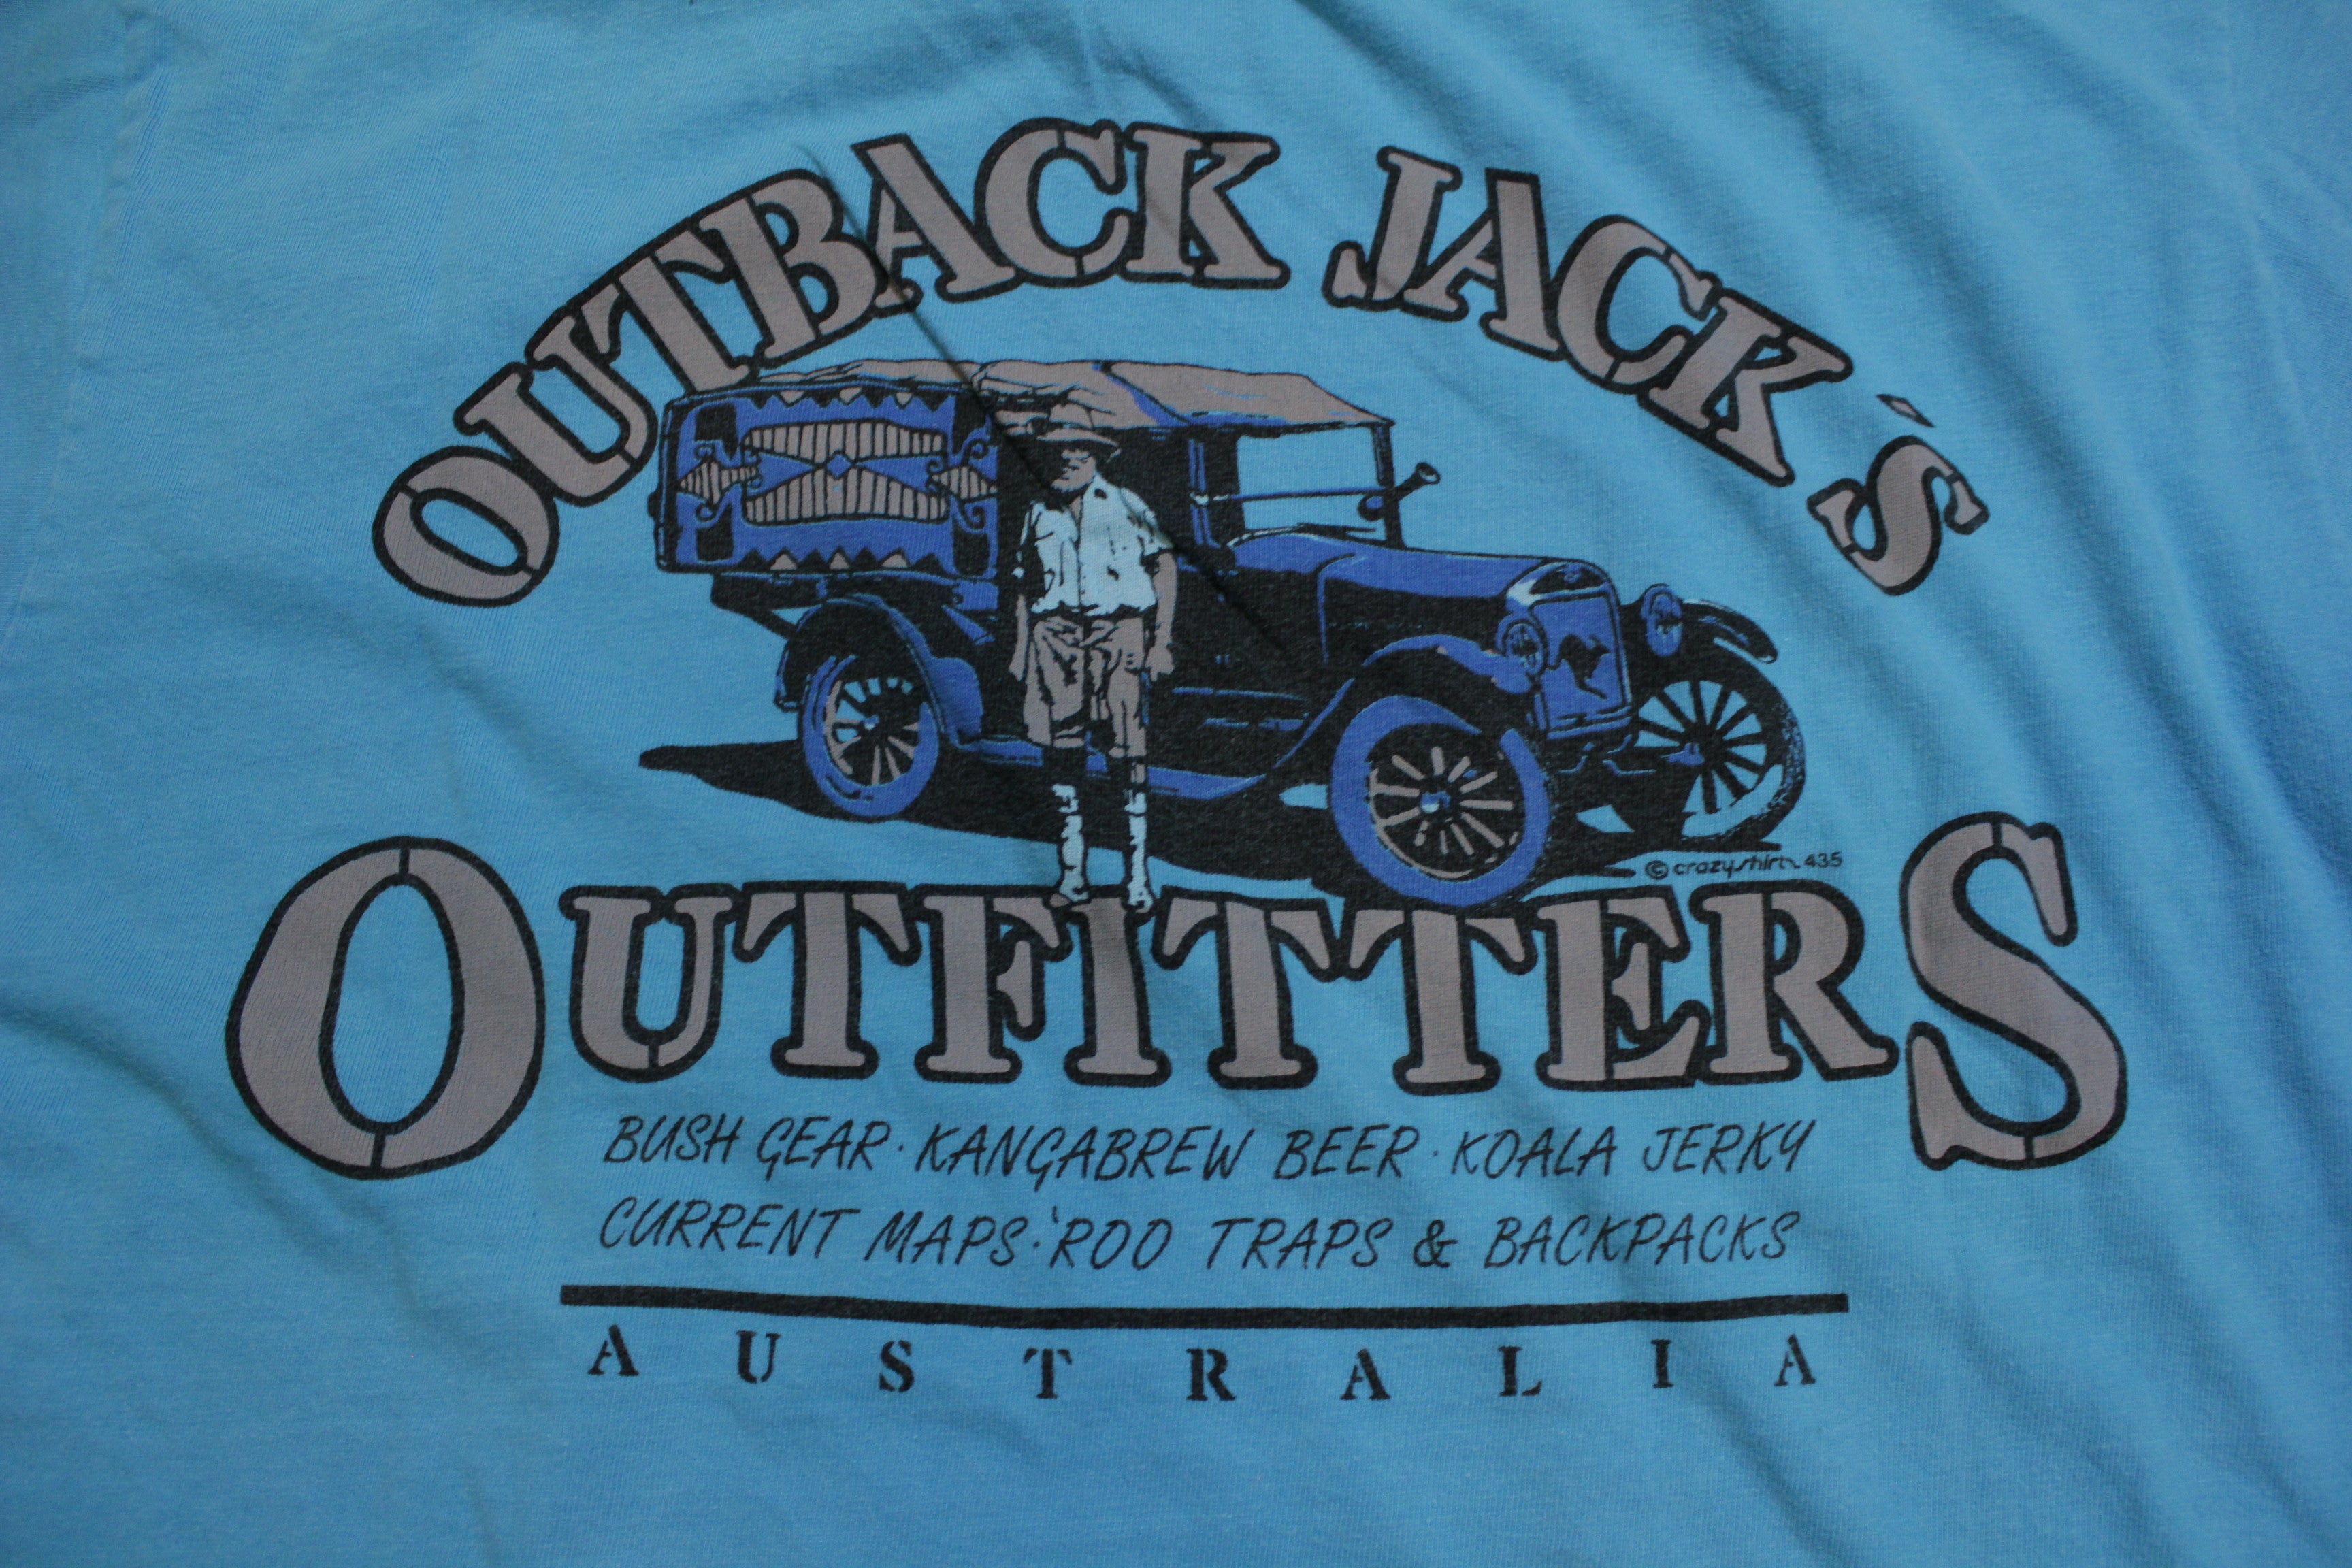 Outback Jacks Outfitters Vintage Crazy Shirts 80's Single Stitch T